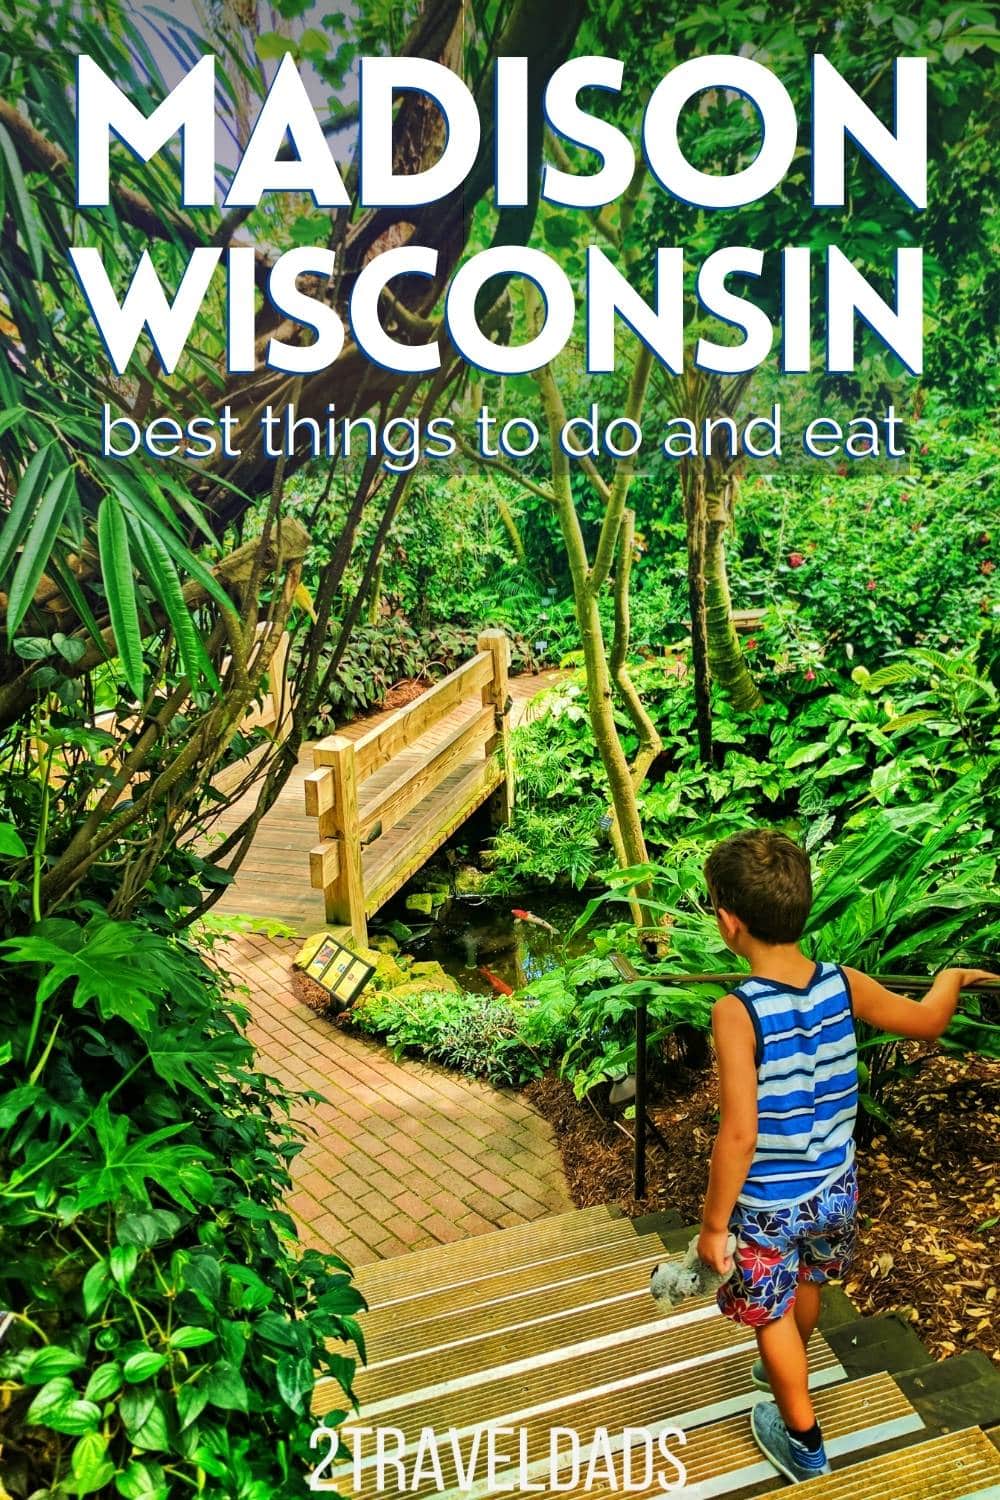 The best things to do in Madison, Wisconsin in summer, including downtown, museums and nature. Recommendations for where to eat, best beers and fun things to do with kids in Madison.